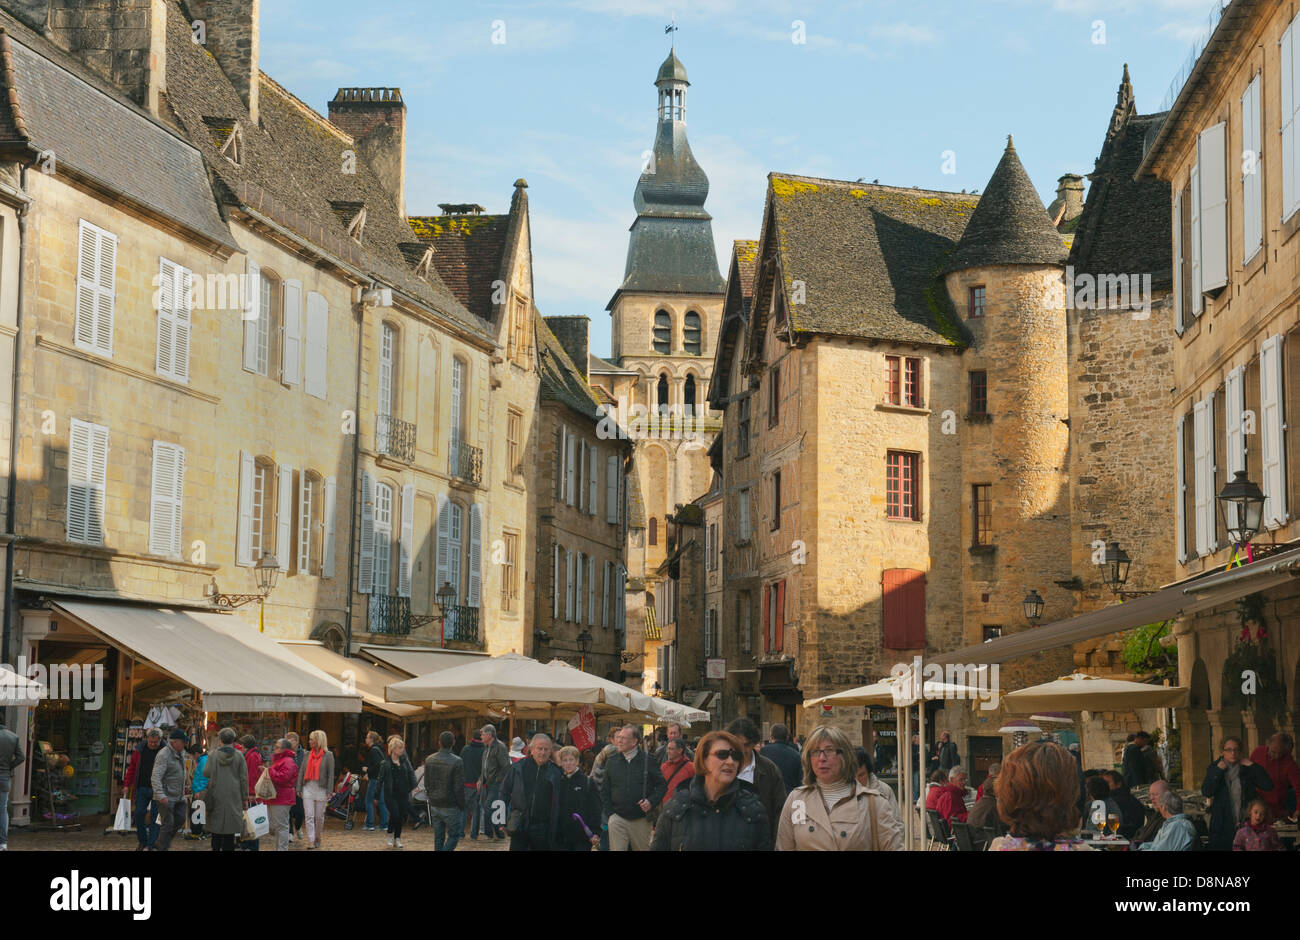 Market Square, Sarlat-la-Canéda, Dordogne FRANCE, well-preserved medieval town Stock Photo